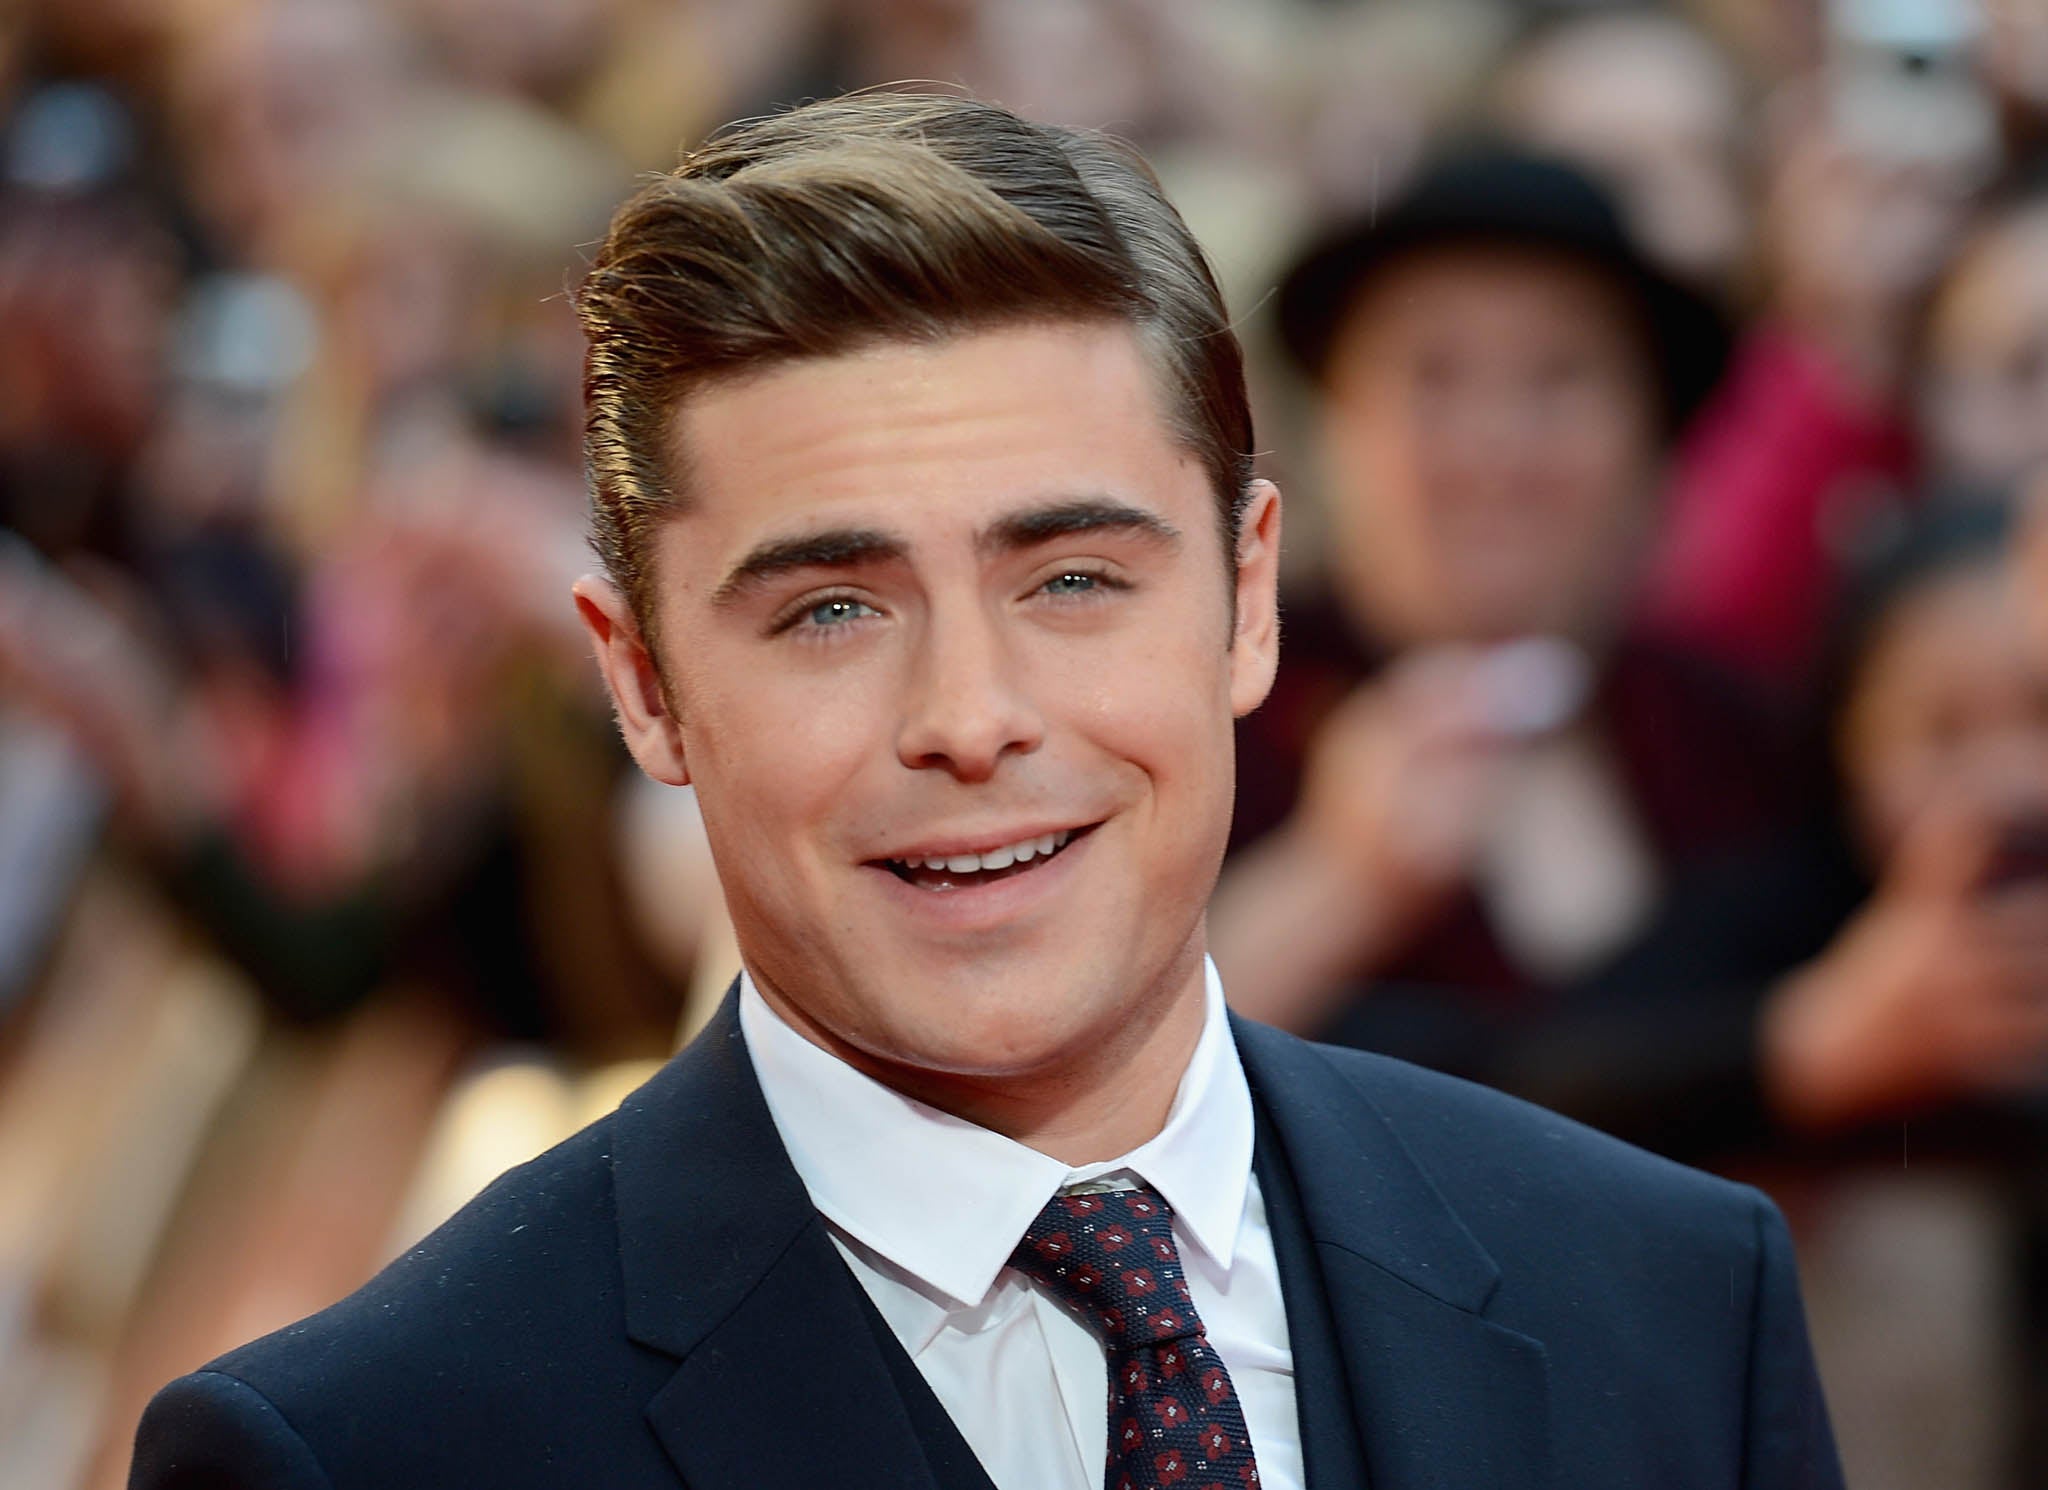 Actor Zac Efron will star as a Yale Law School graduate in 'The Associate'